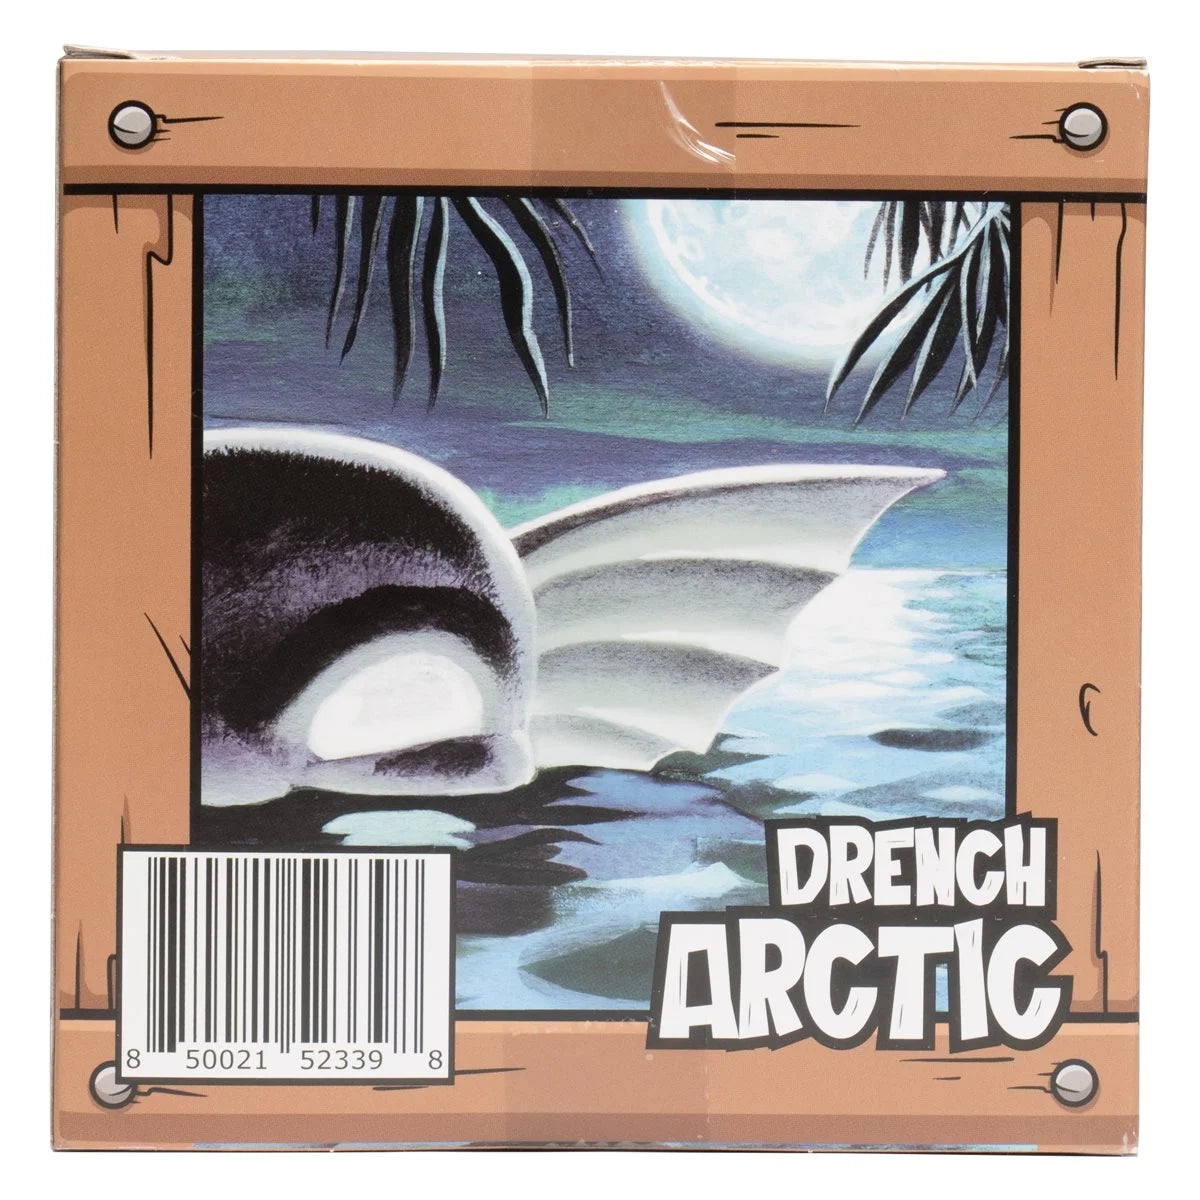 Plunderlings Drench Arctic Clear Variant 1:12 Scale Action Figure | SDCC Convention Exclusive-9